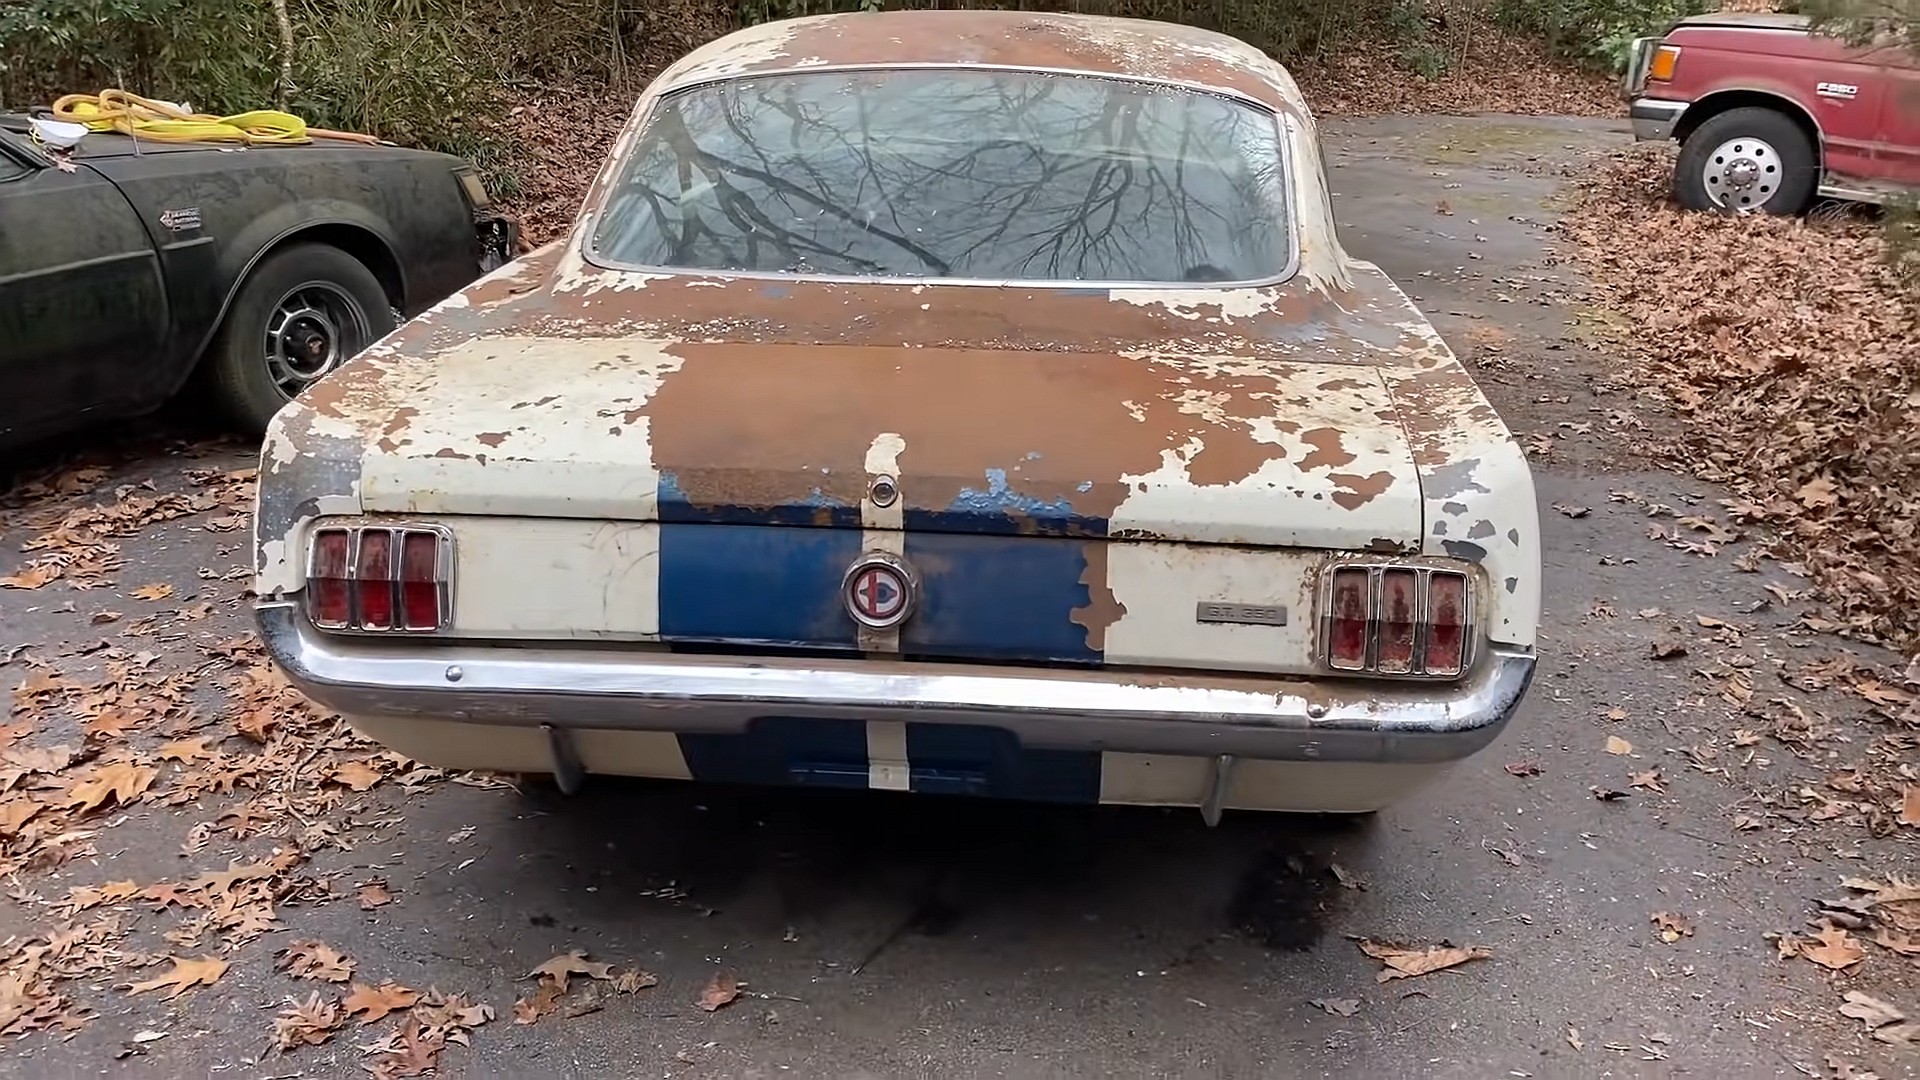 barn find gold 1965 shelby mustang gt350 stored for decades in abandoned house 6